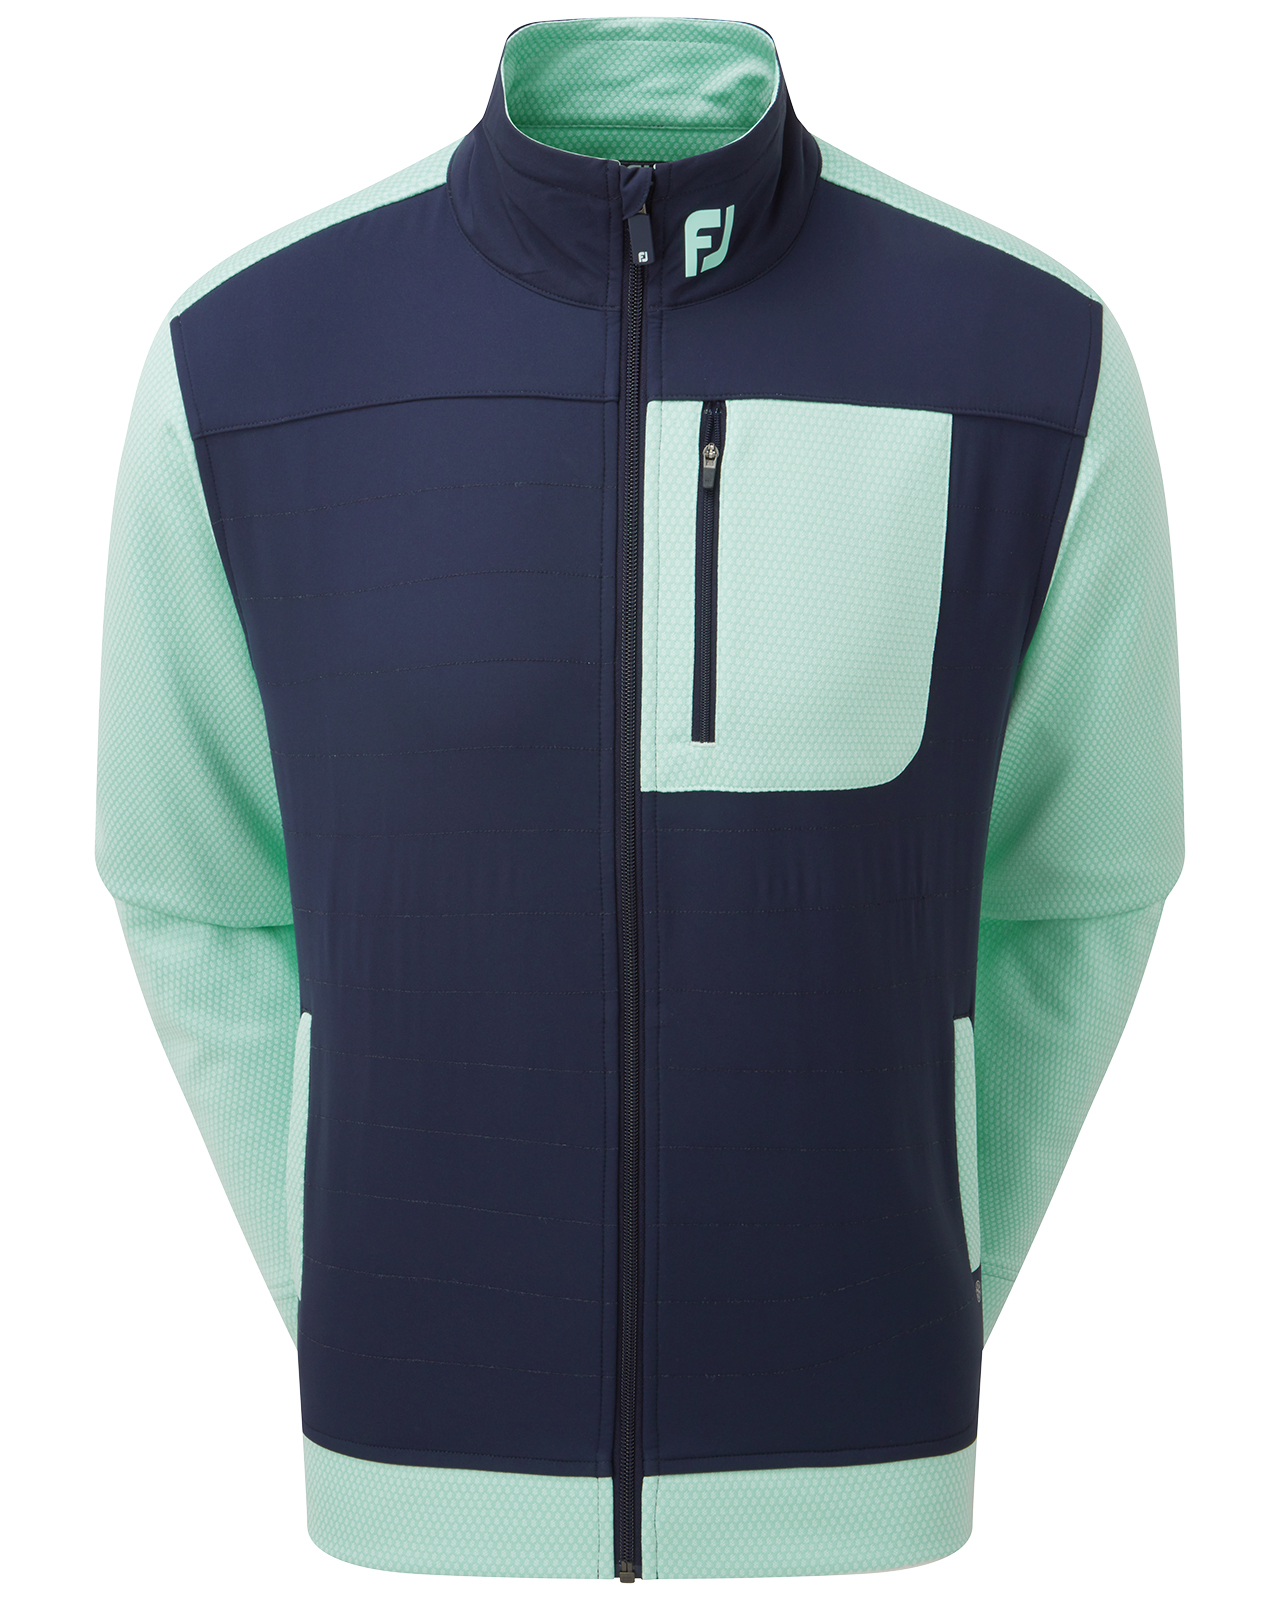 ThermoSeries Hybrid, Jack, Heren - sea_glass_navy